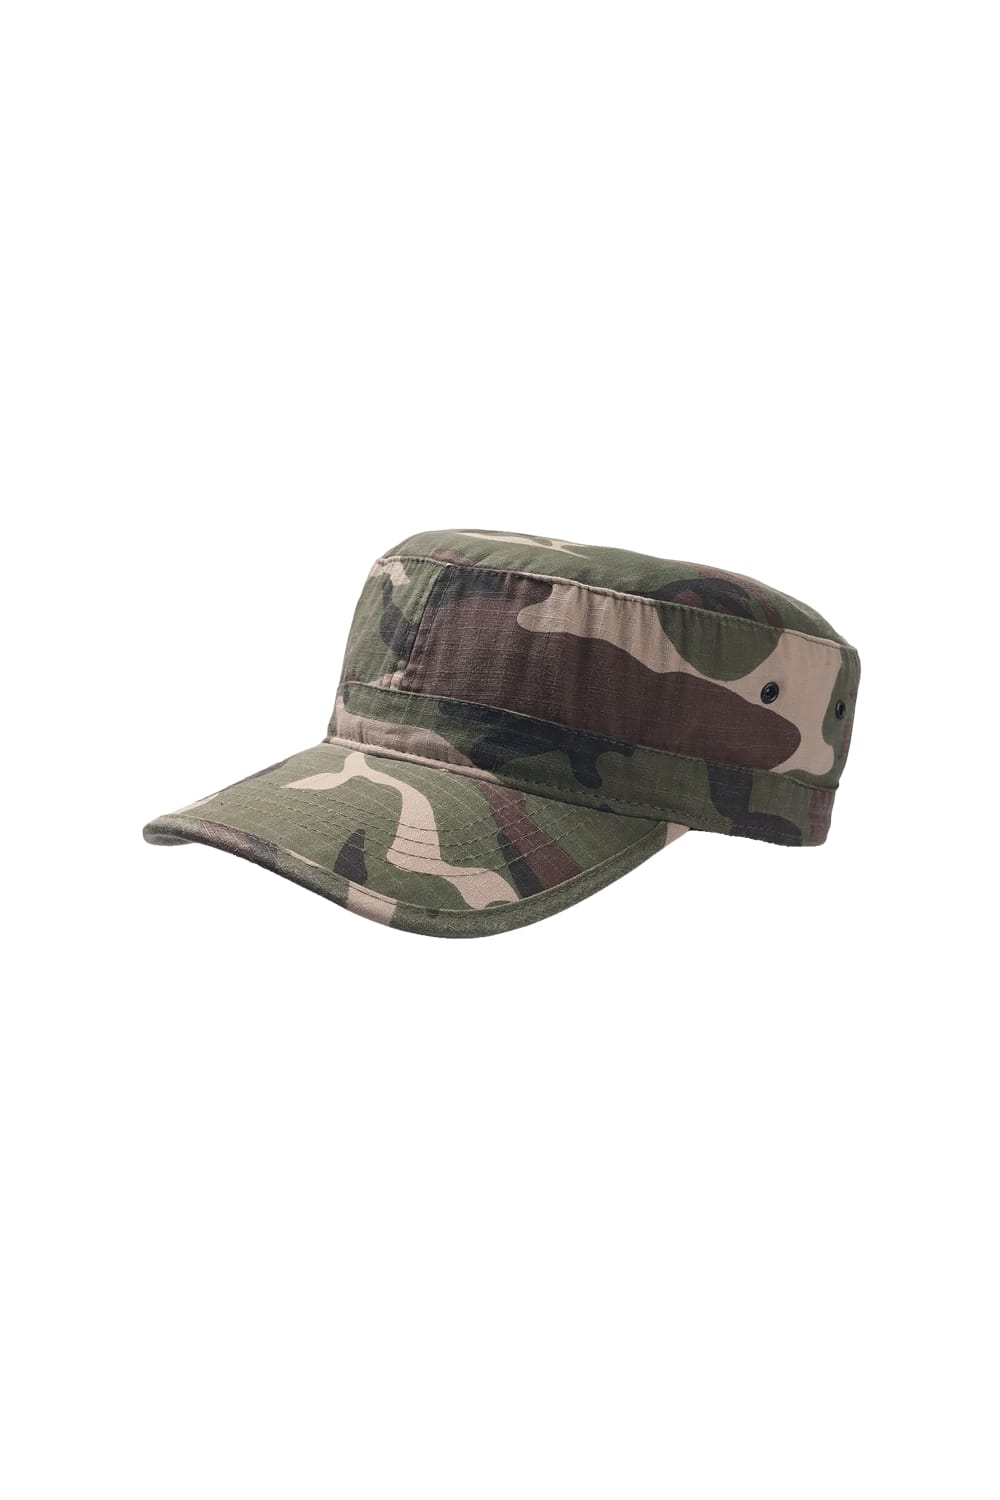 Atlantis Army Military Cap (Pack of 2) (Camouflage)